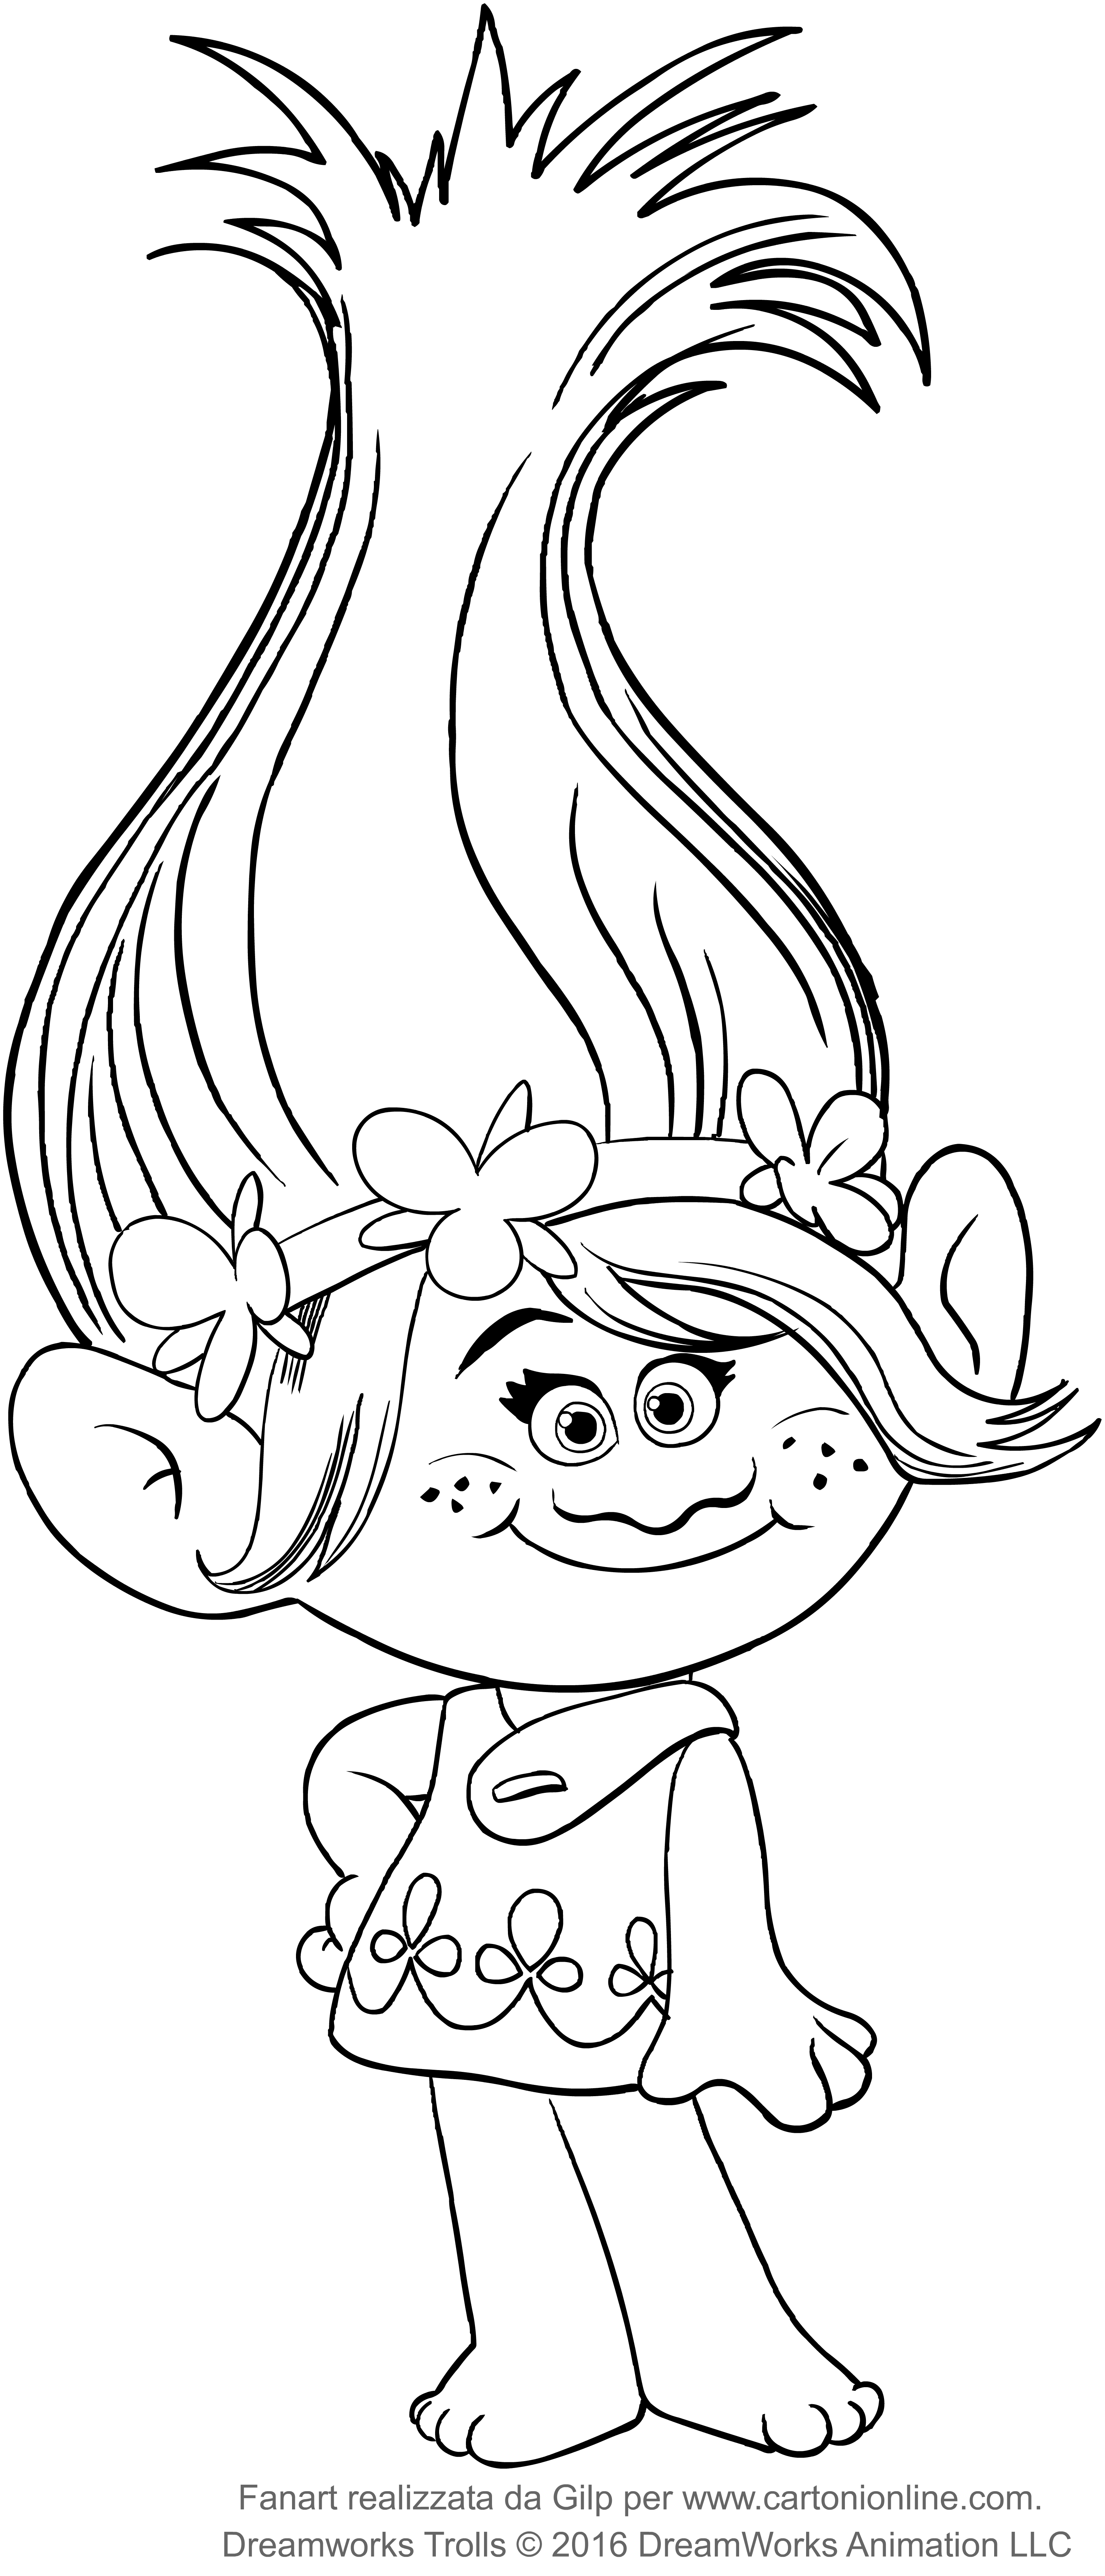 Poppy From The Trolls Coloring Pages